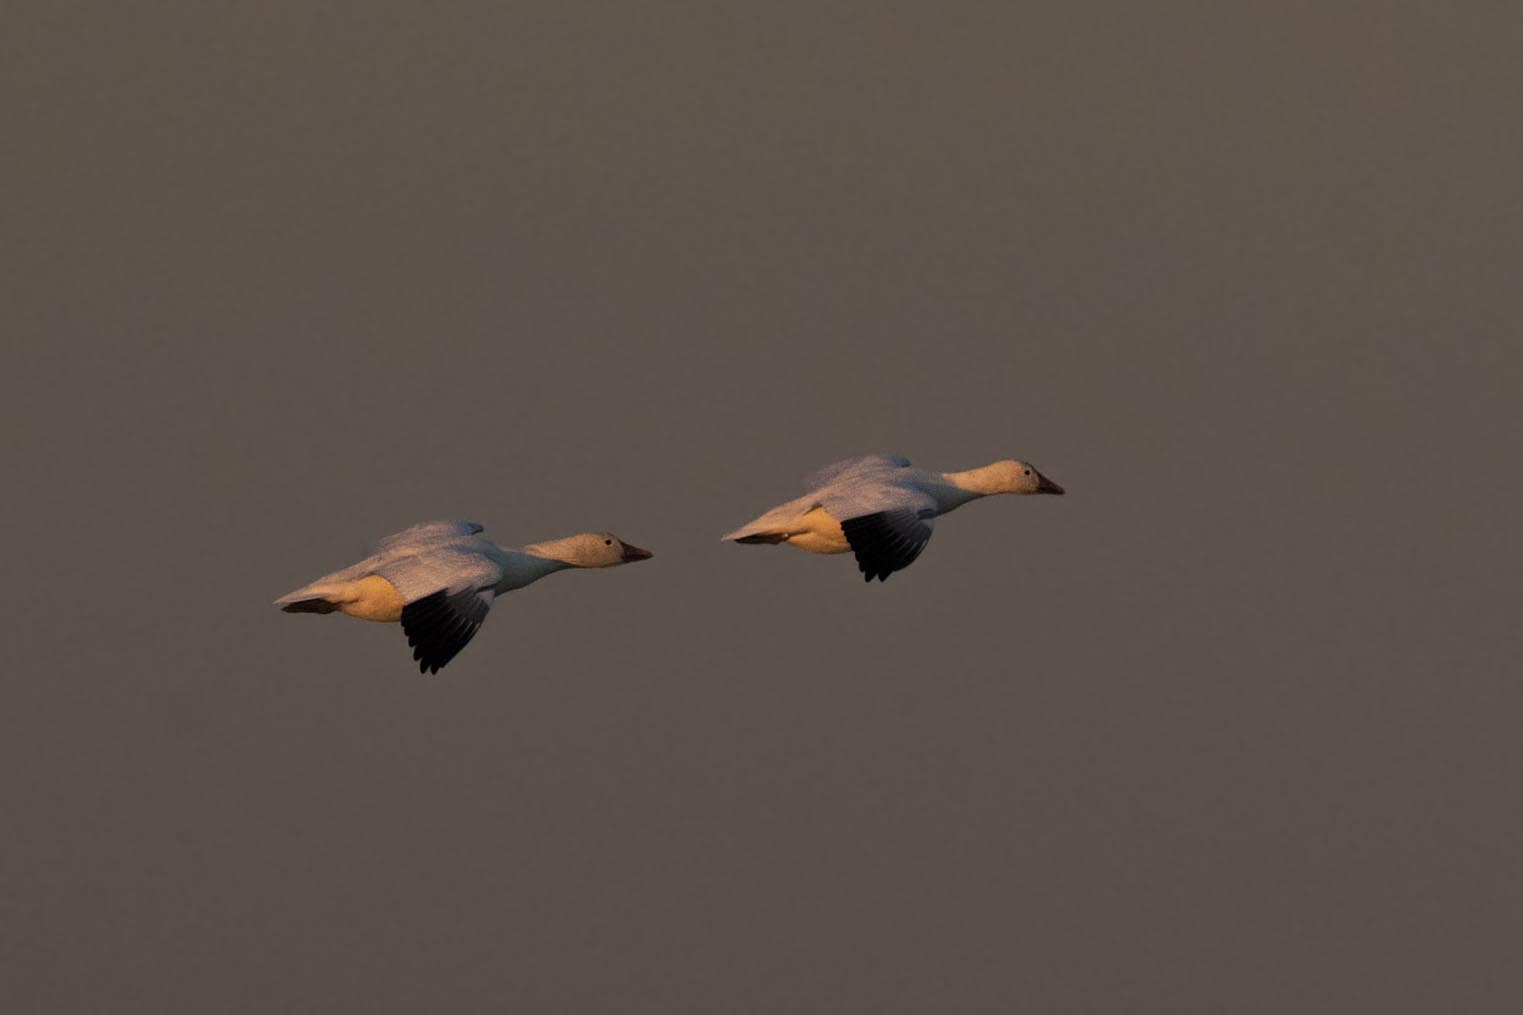 Snow Geese at dusk p 4181s